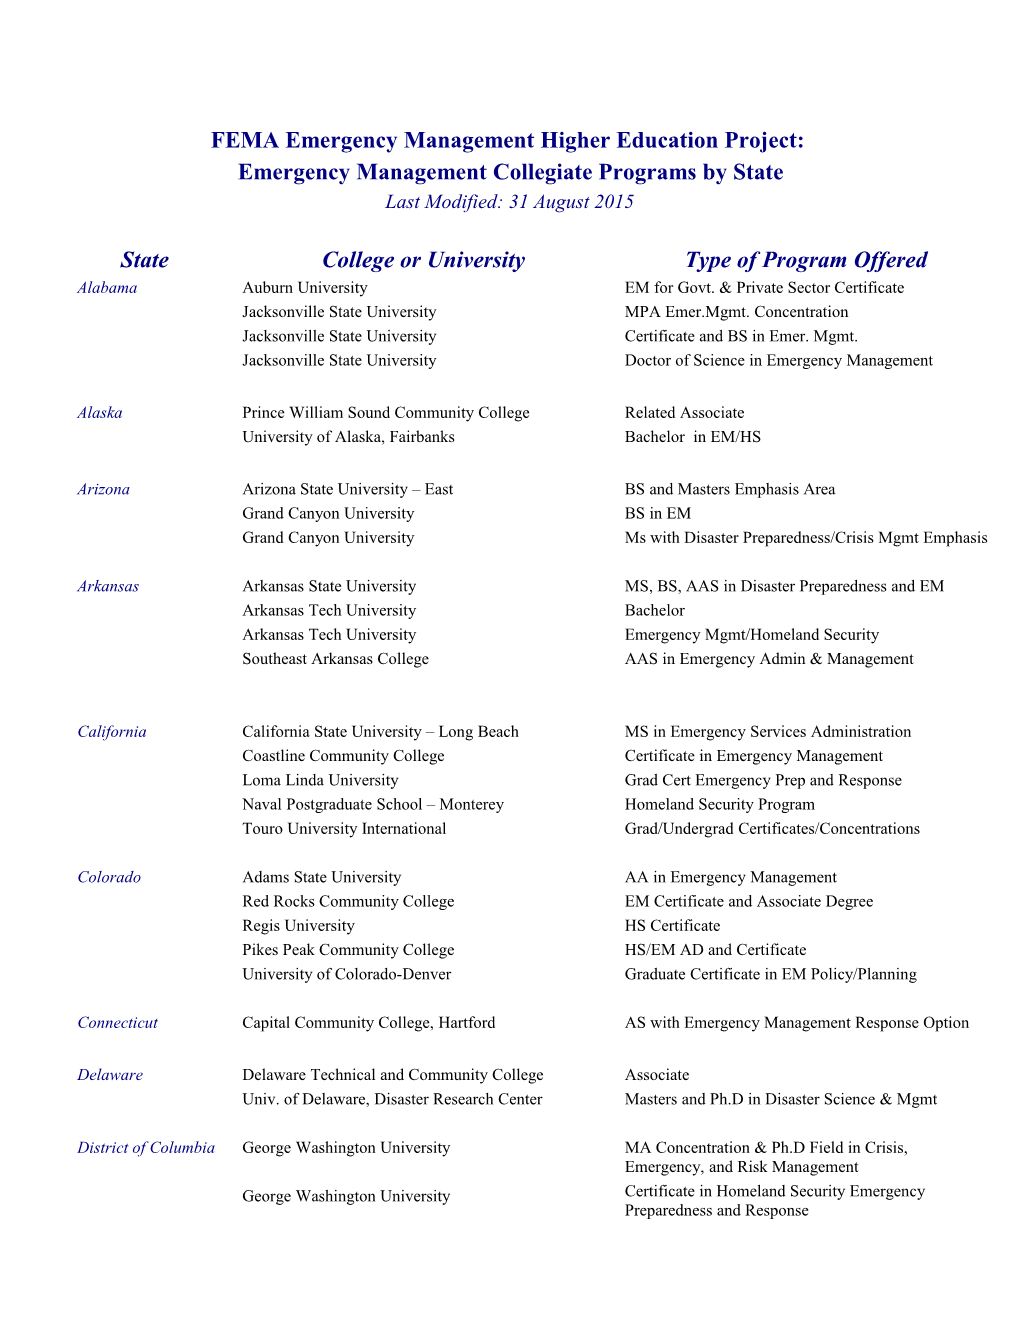 Higher Education Project: Programs by State s1